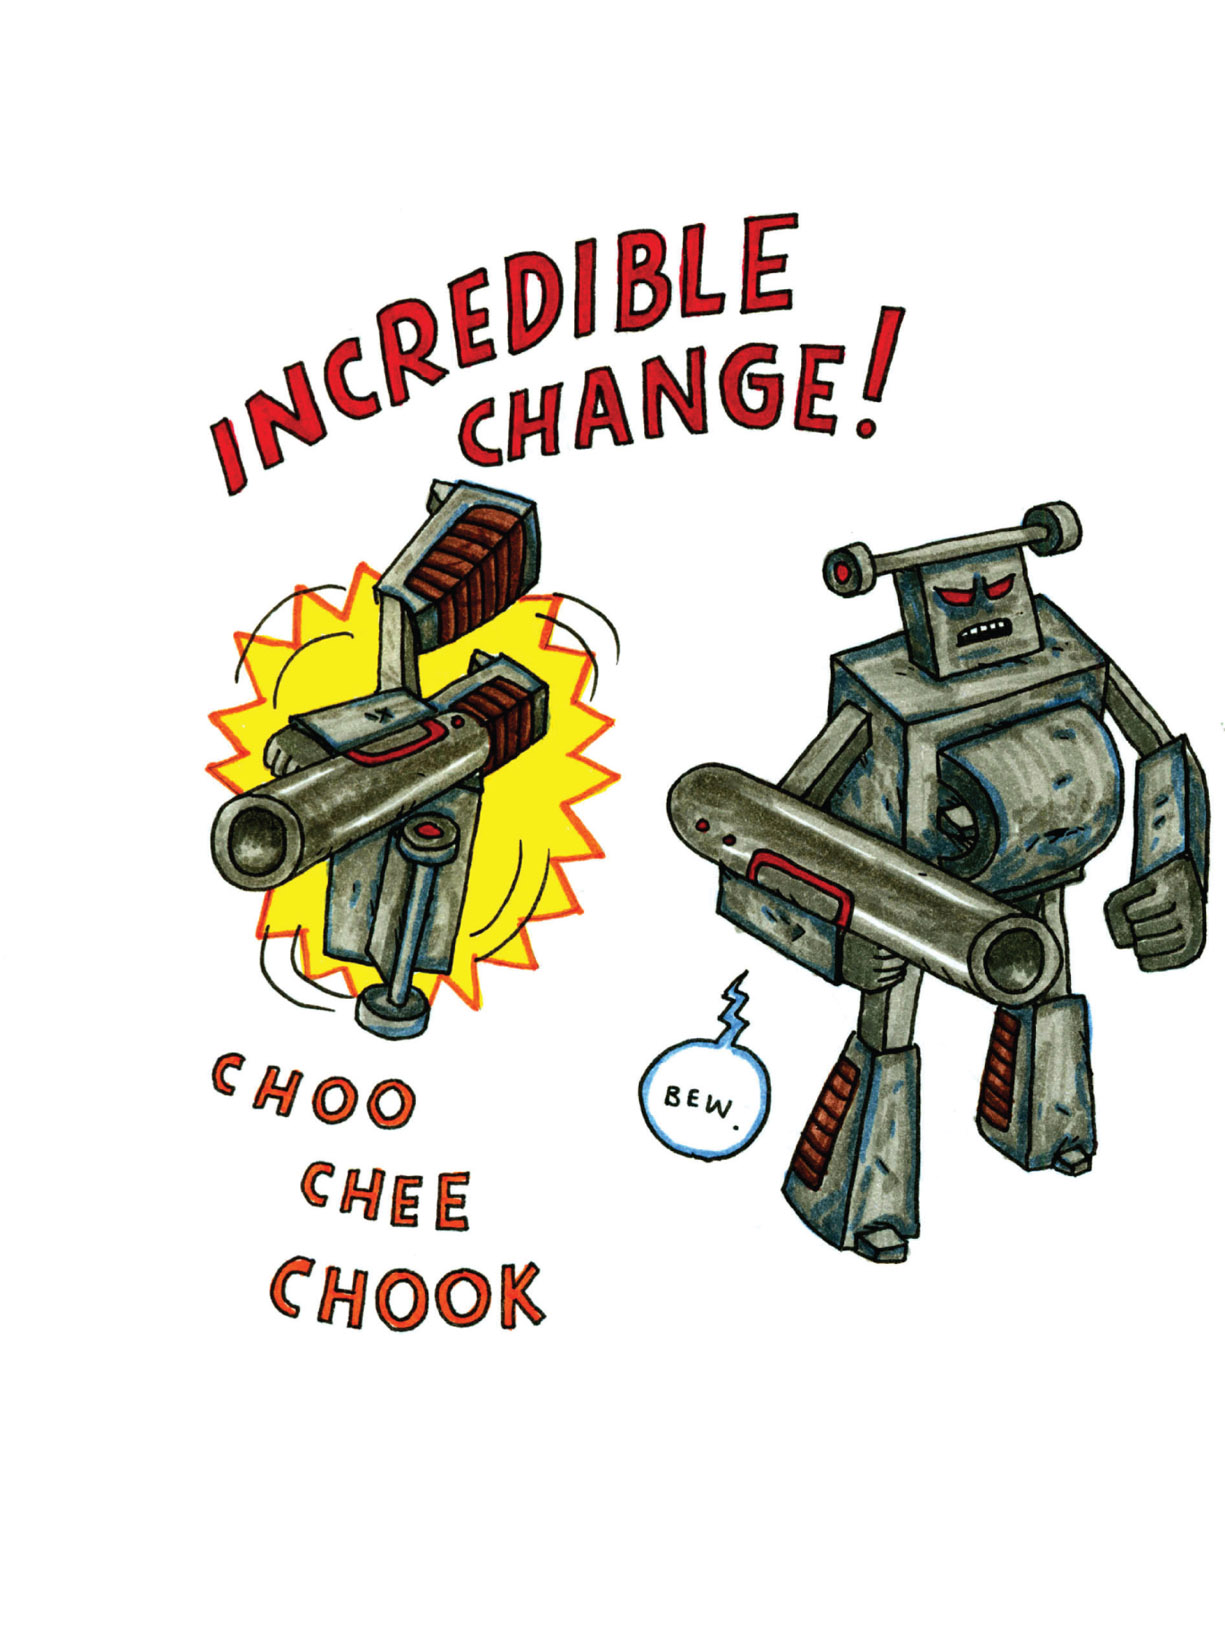 Read online Incredible Change-Bots comic -  Issue # TPB 2 - 4